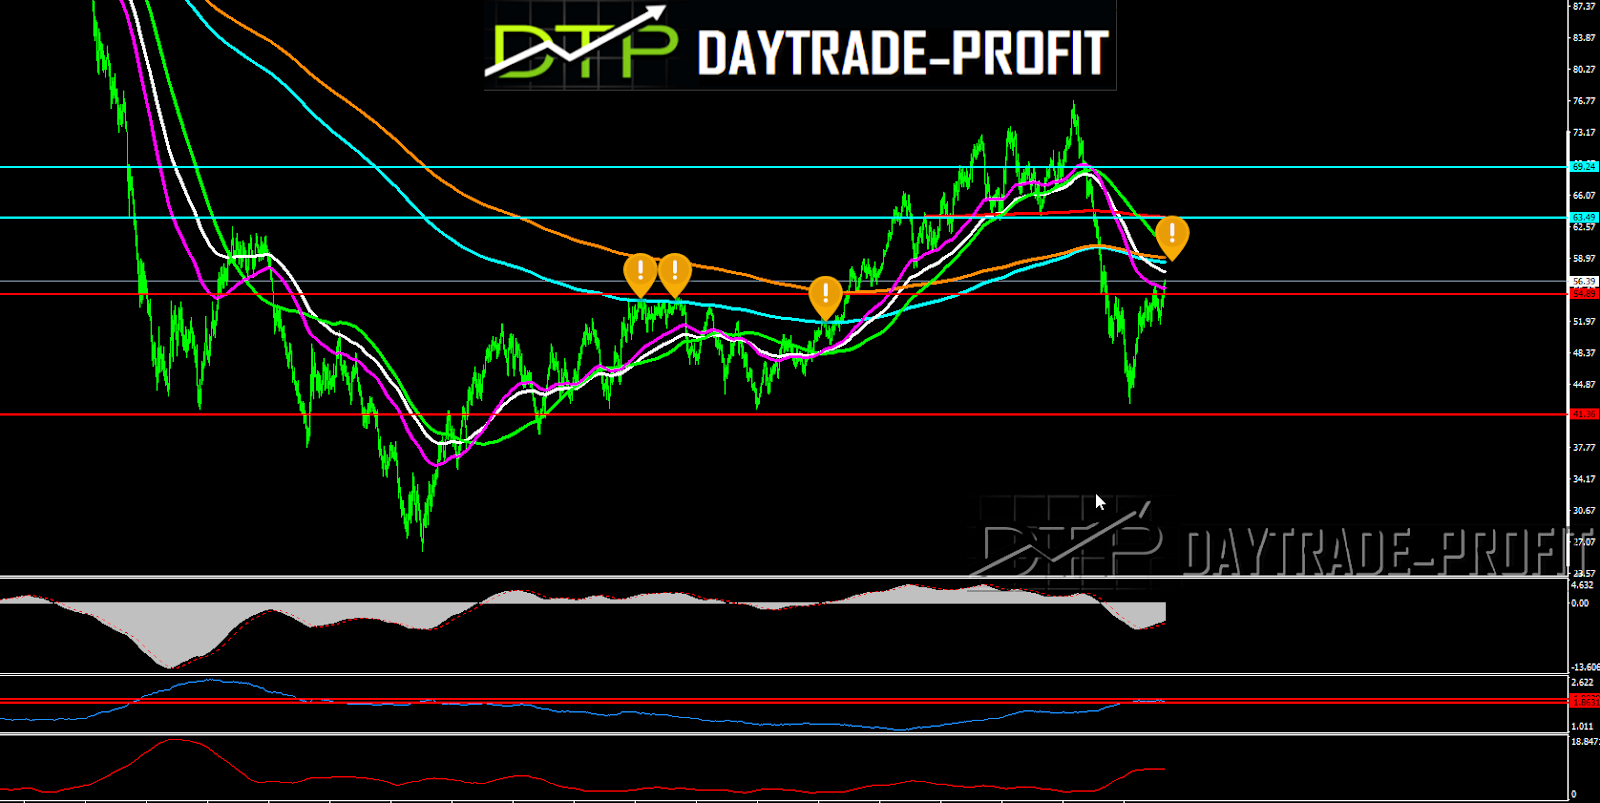 Oil Price Technical Analysis Chart